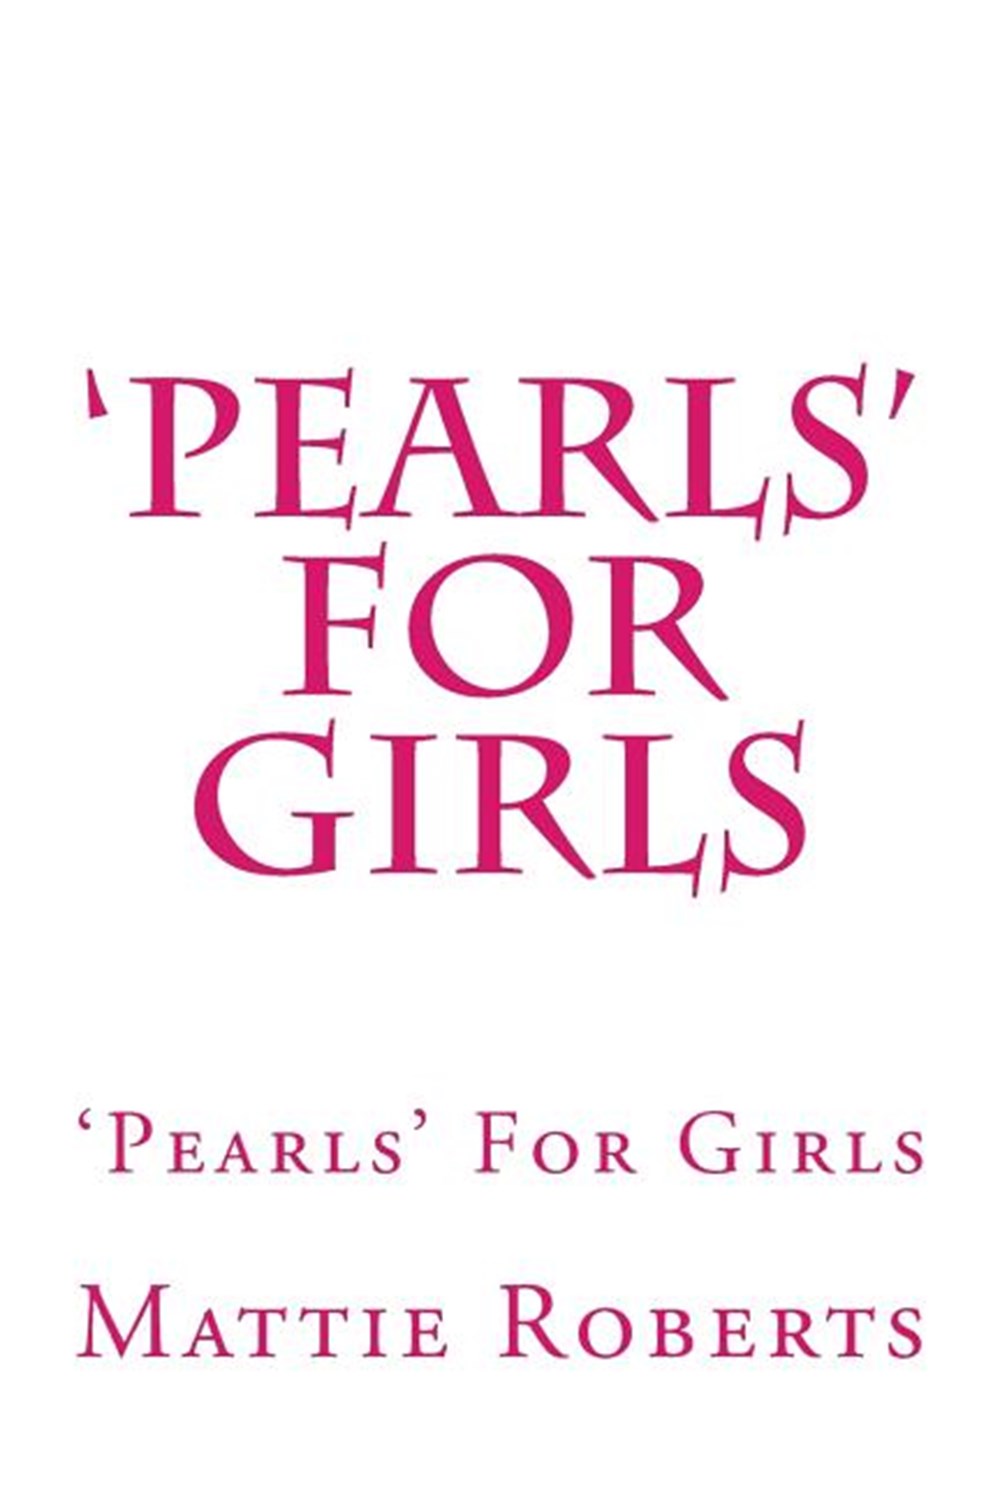 'Pearls' for Girls: 'Pearls' For Girls